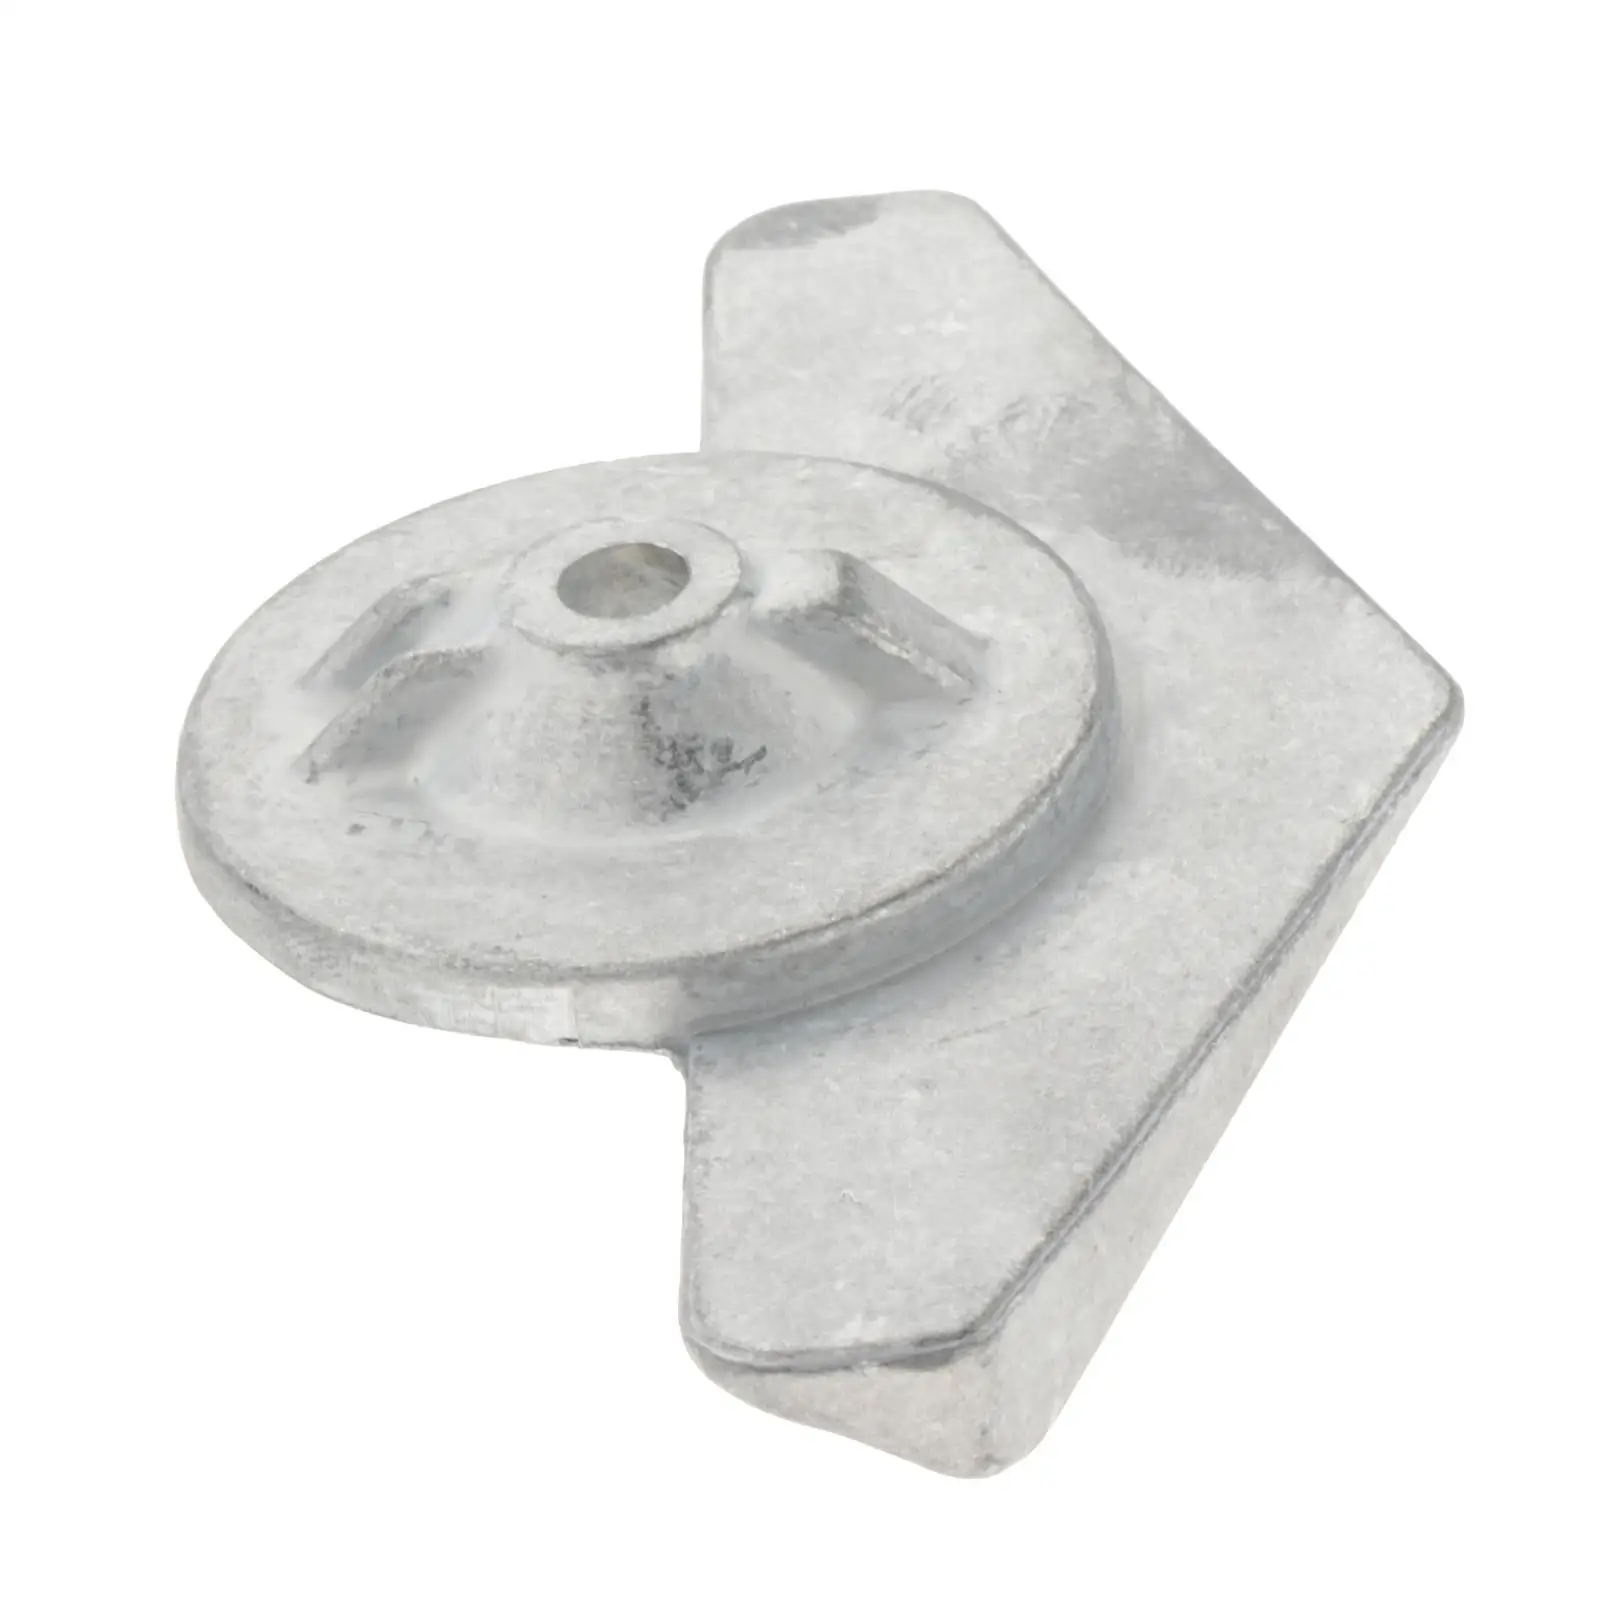 Anode Fits for Yamaha Outboard Motor F9.9 F15 15HP 2 Stroke & 4 Stroke Accessories Spare Parts 6E8-45251-02 Replacement